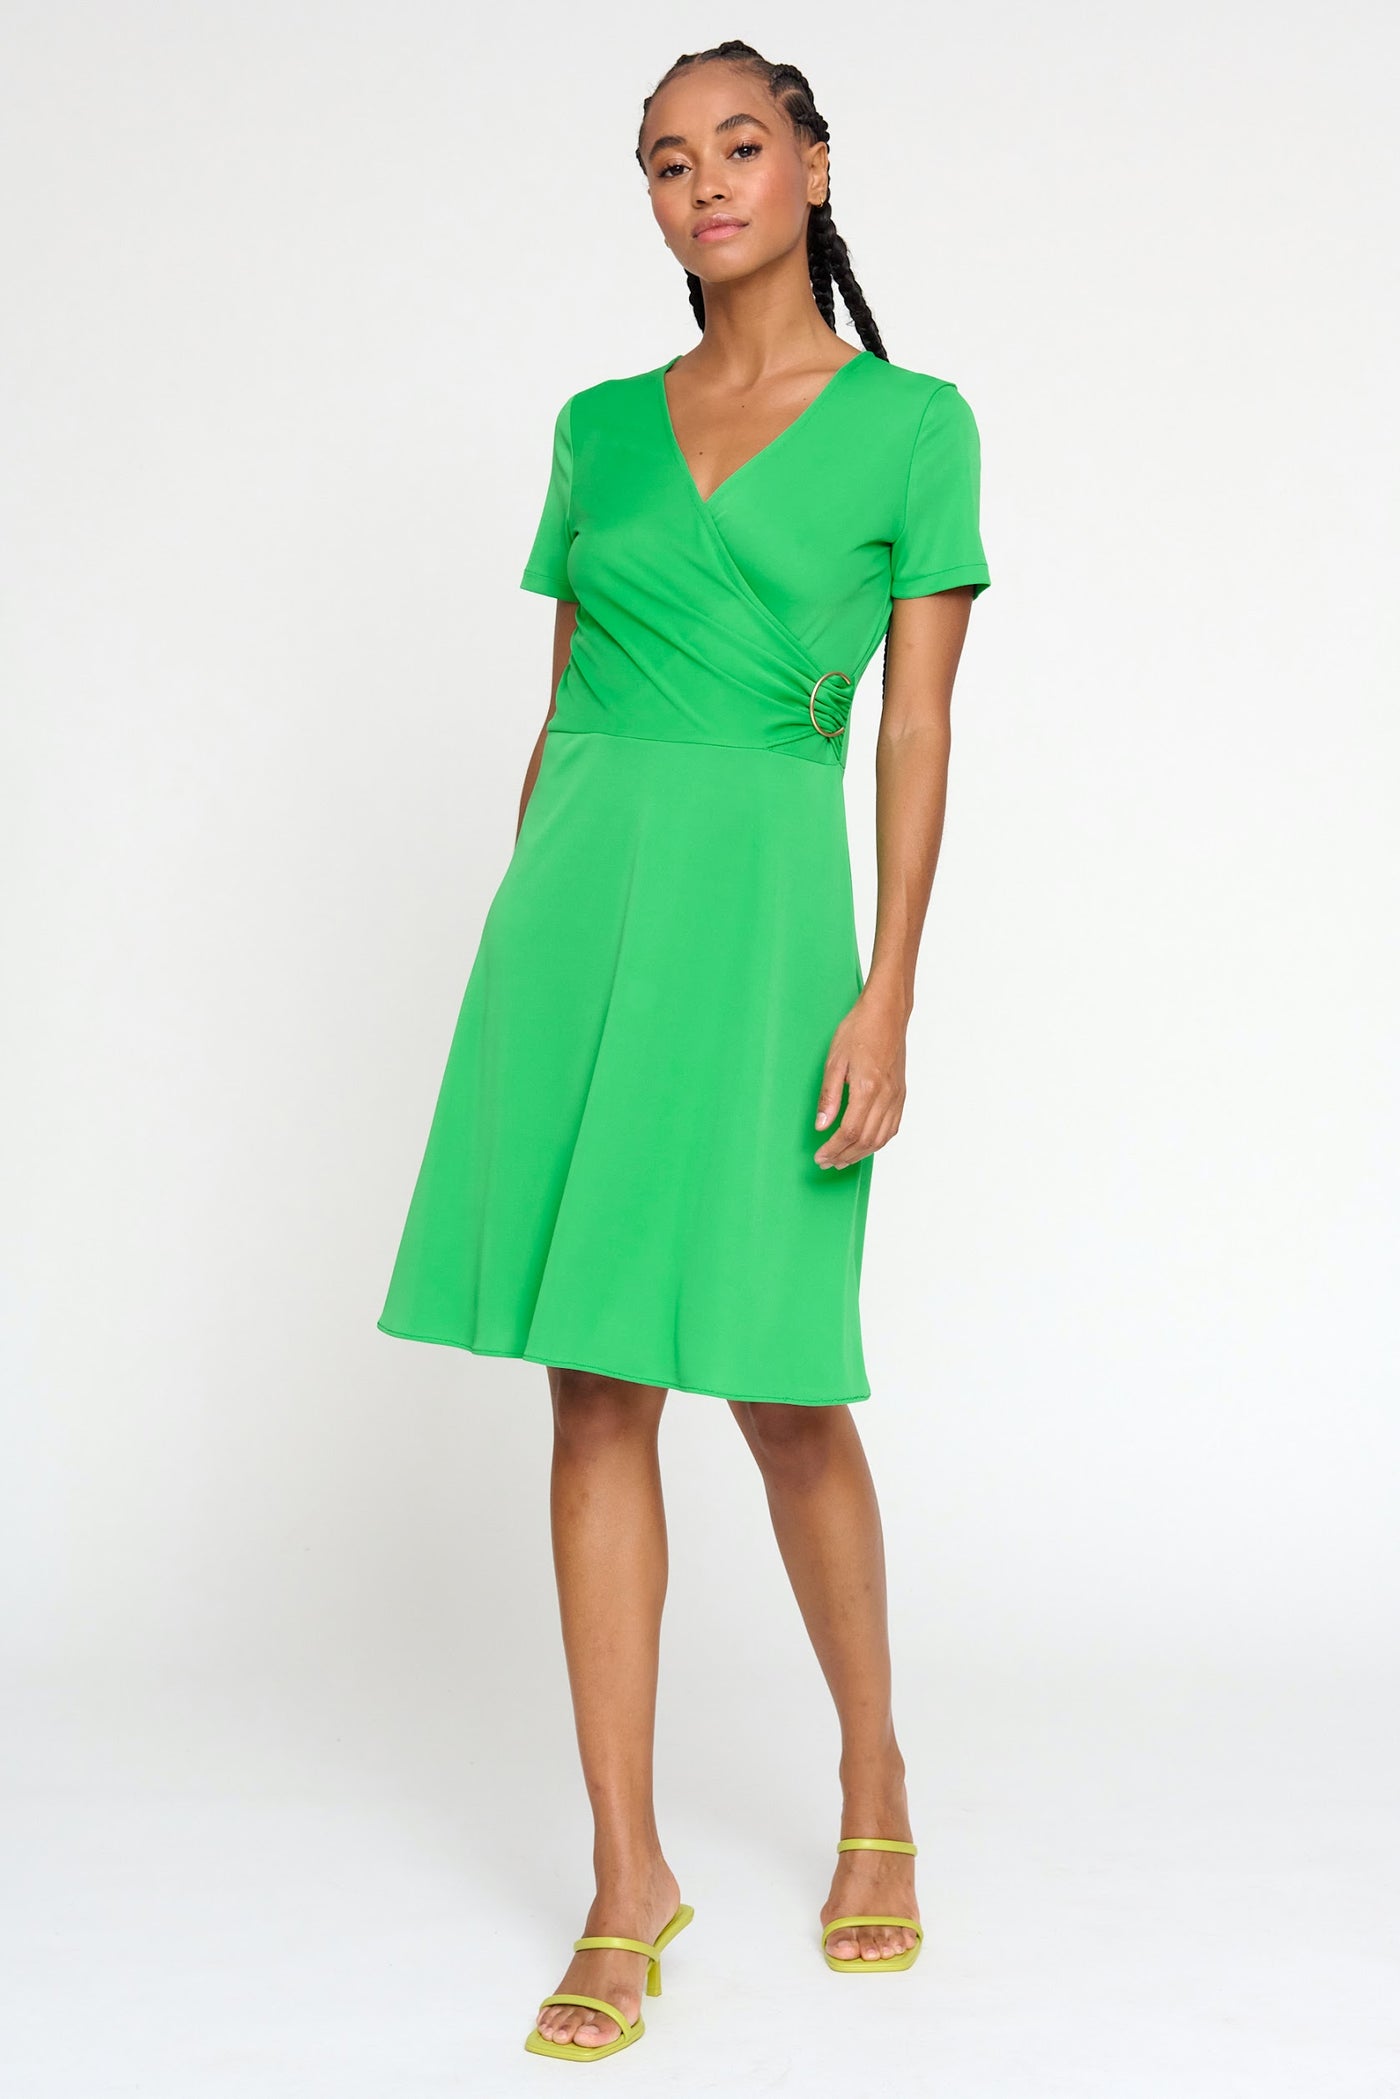 Green V-Neck Wrap Style Short Sleeve Dress With Buckle Detailing